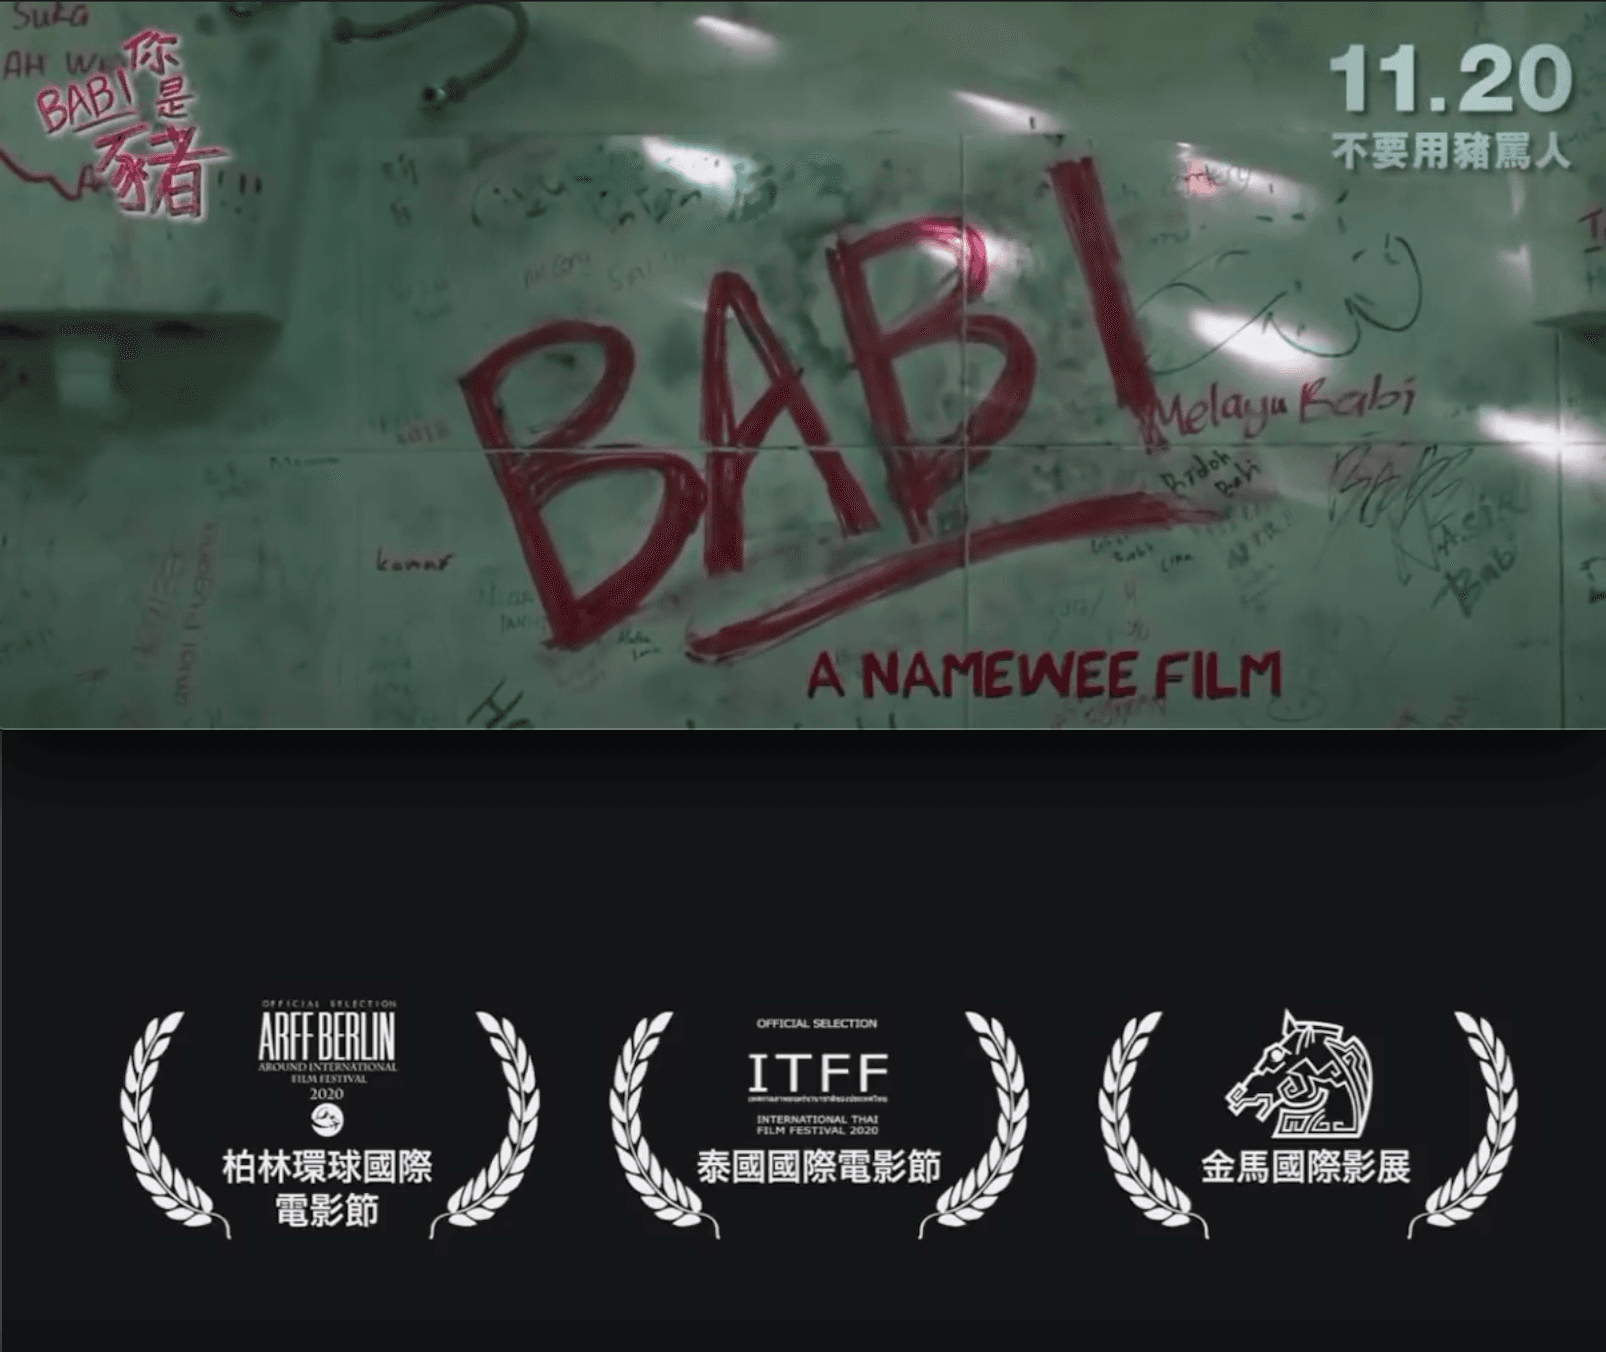 Controversial producer Namewee claims his new film 'Babi' has been shortlisted by the organisers of several film festivals abroad.